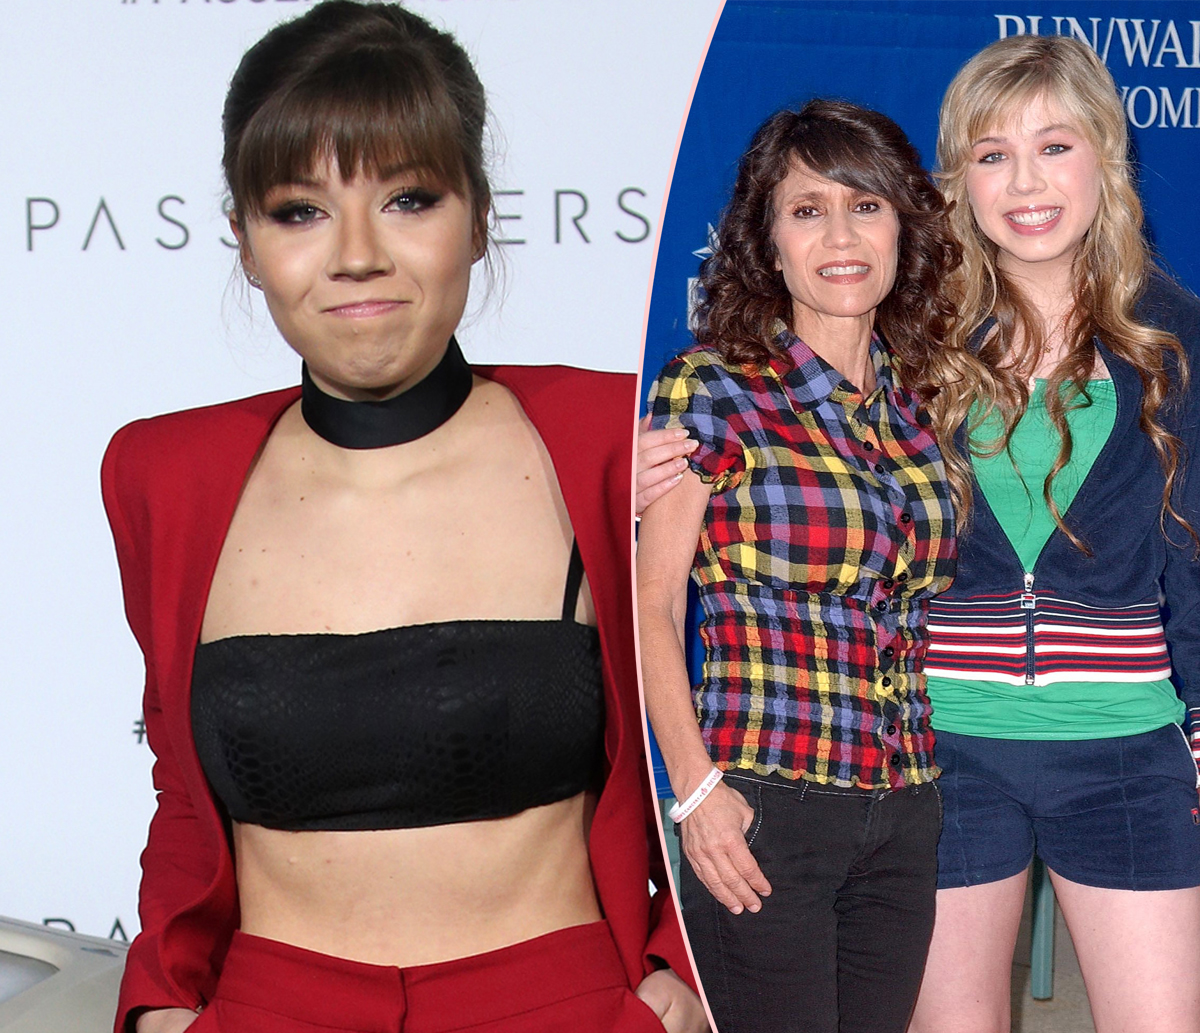 #Jennette McCurdy Details Her Mother’s ‘Abuse’ & ‘Conditioning’ To Become A Child Star